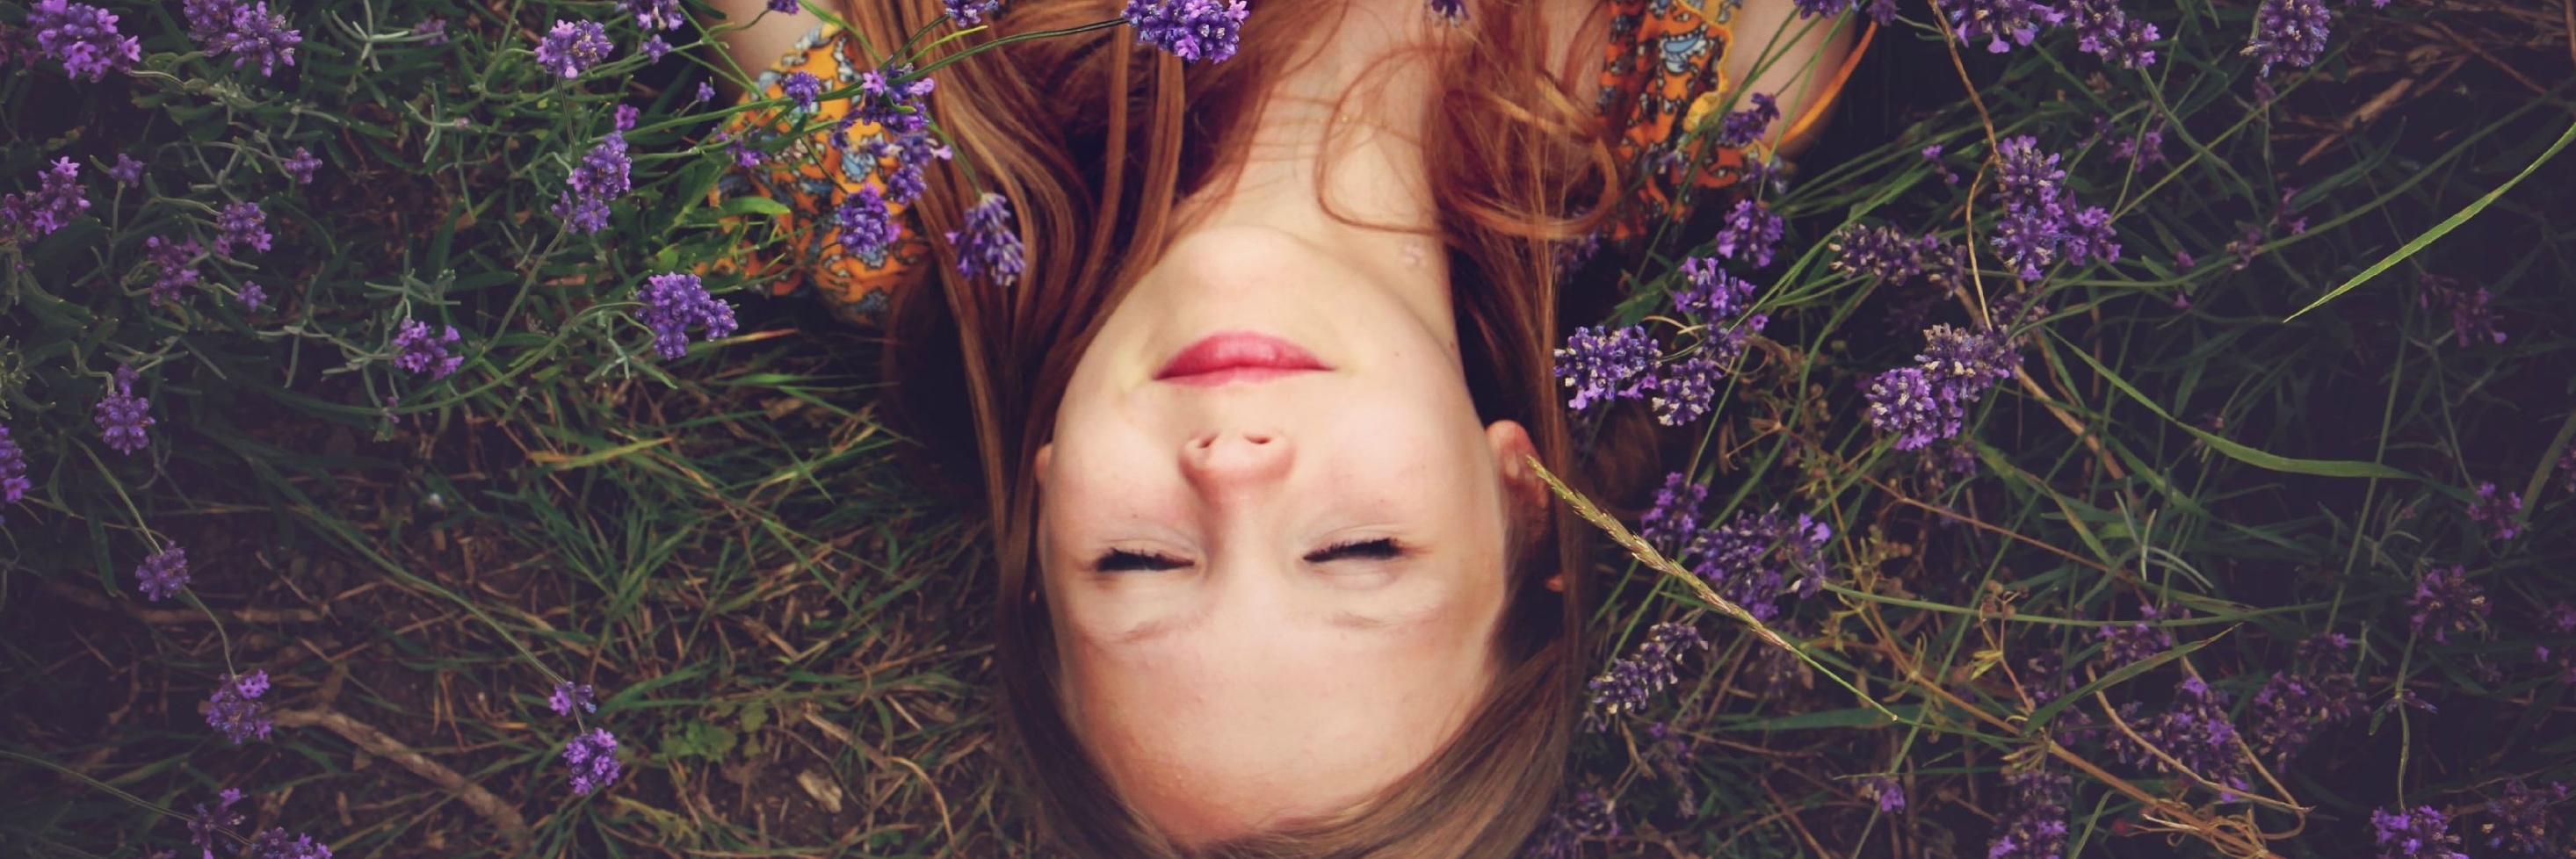 woman at peace lying on her back in purple flowers